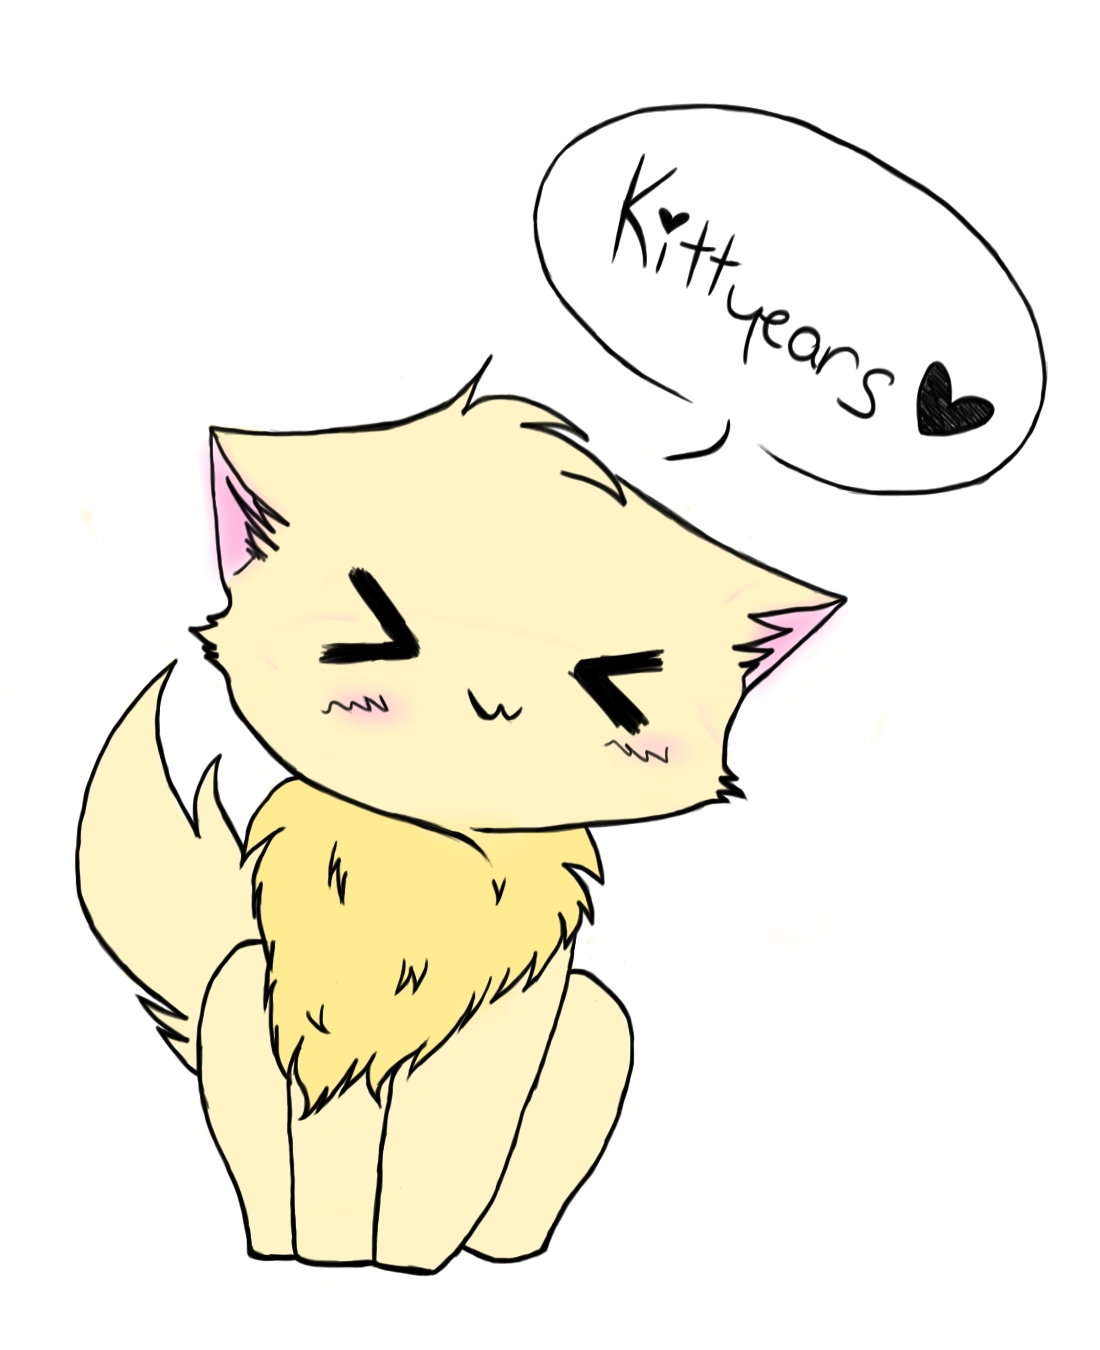 KittyearsIconCOLORED.jpg